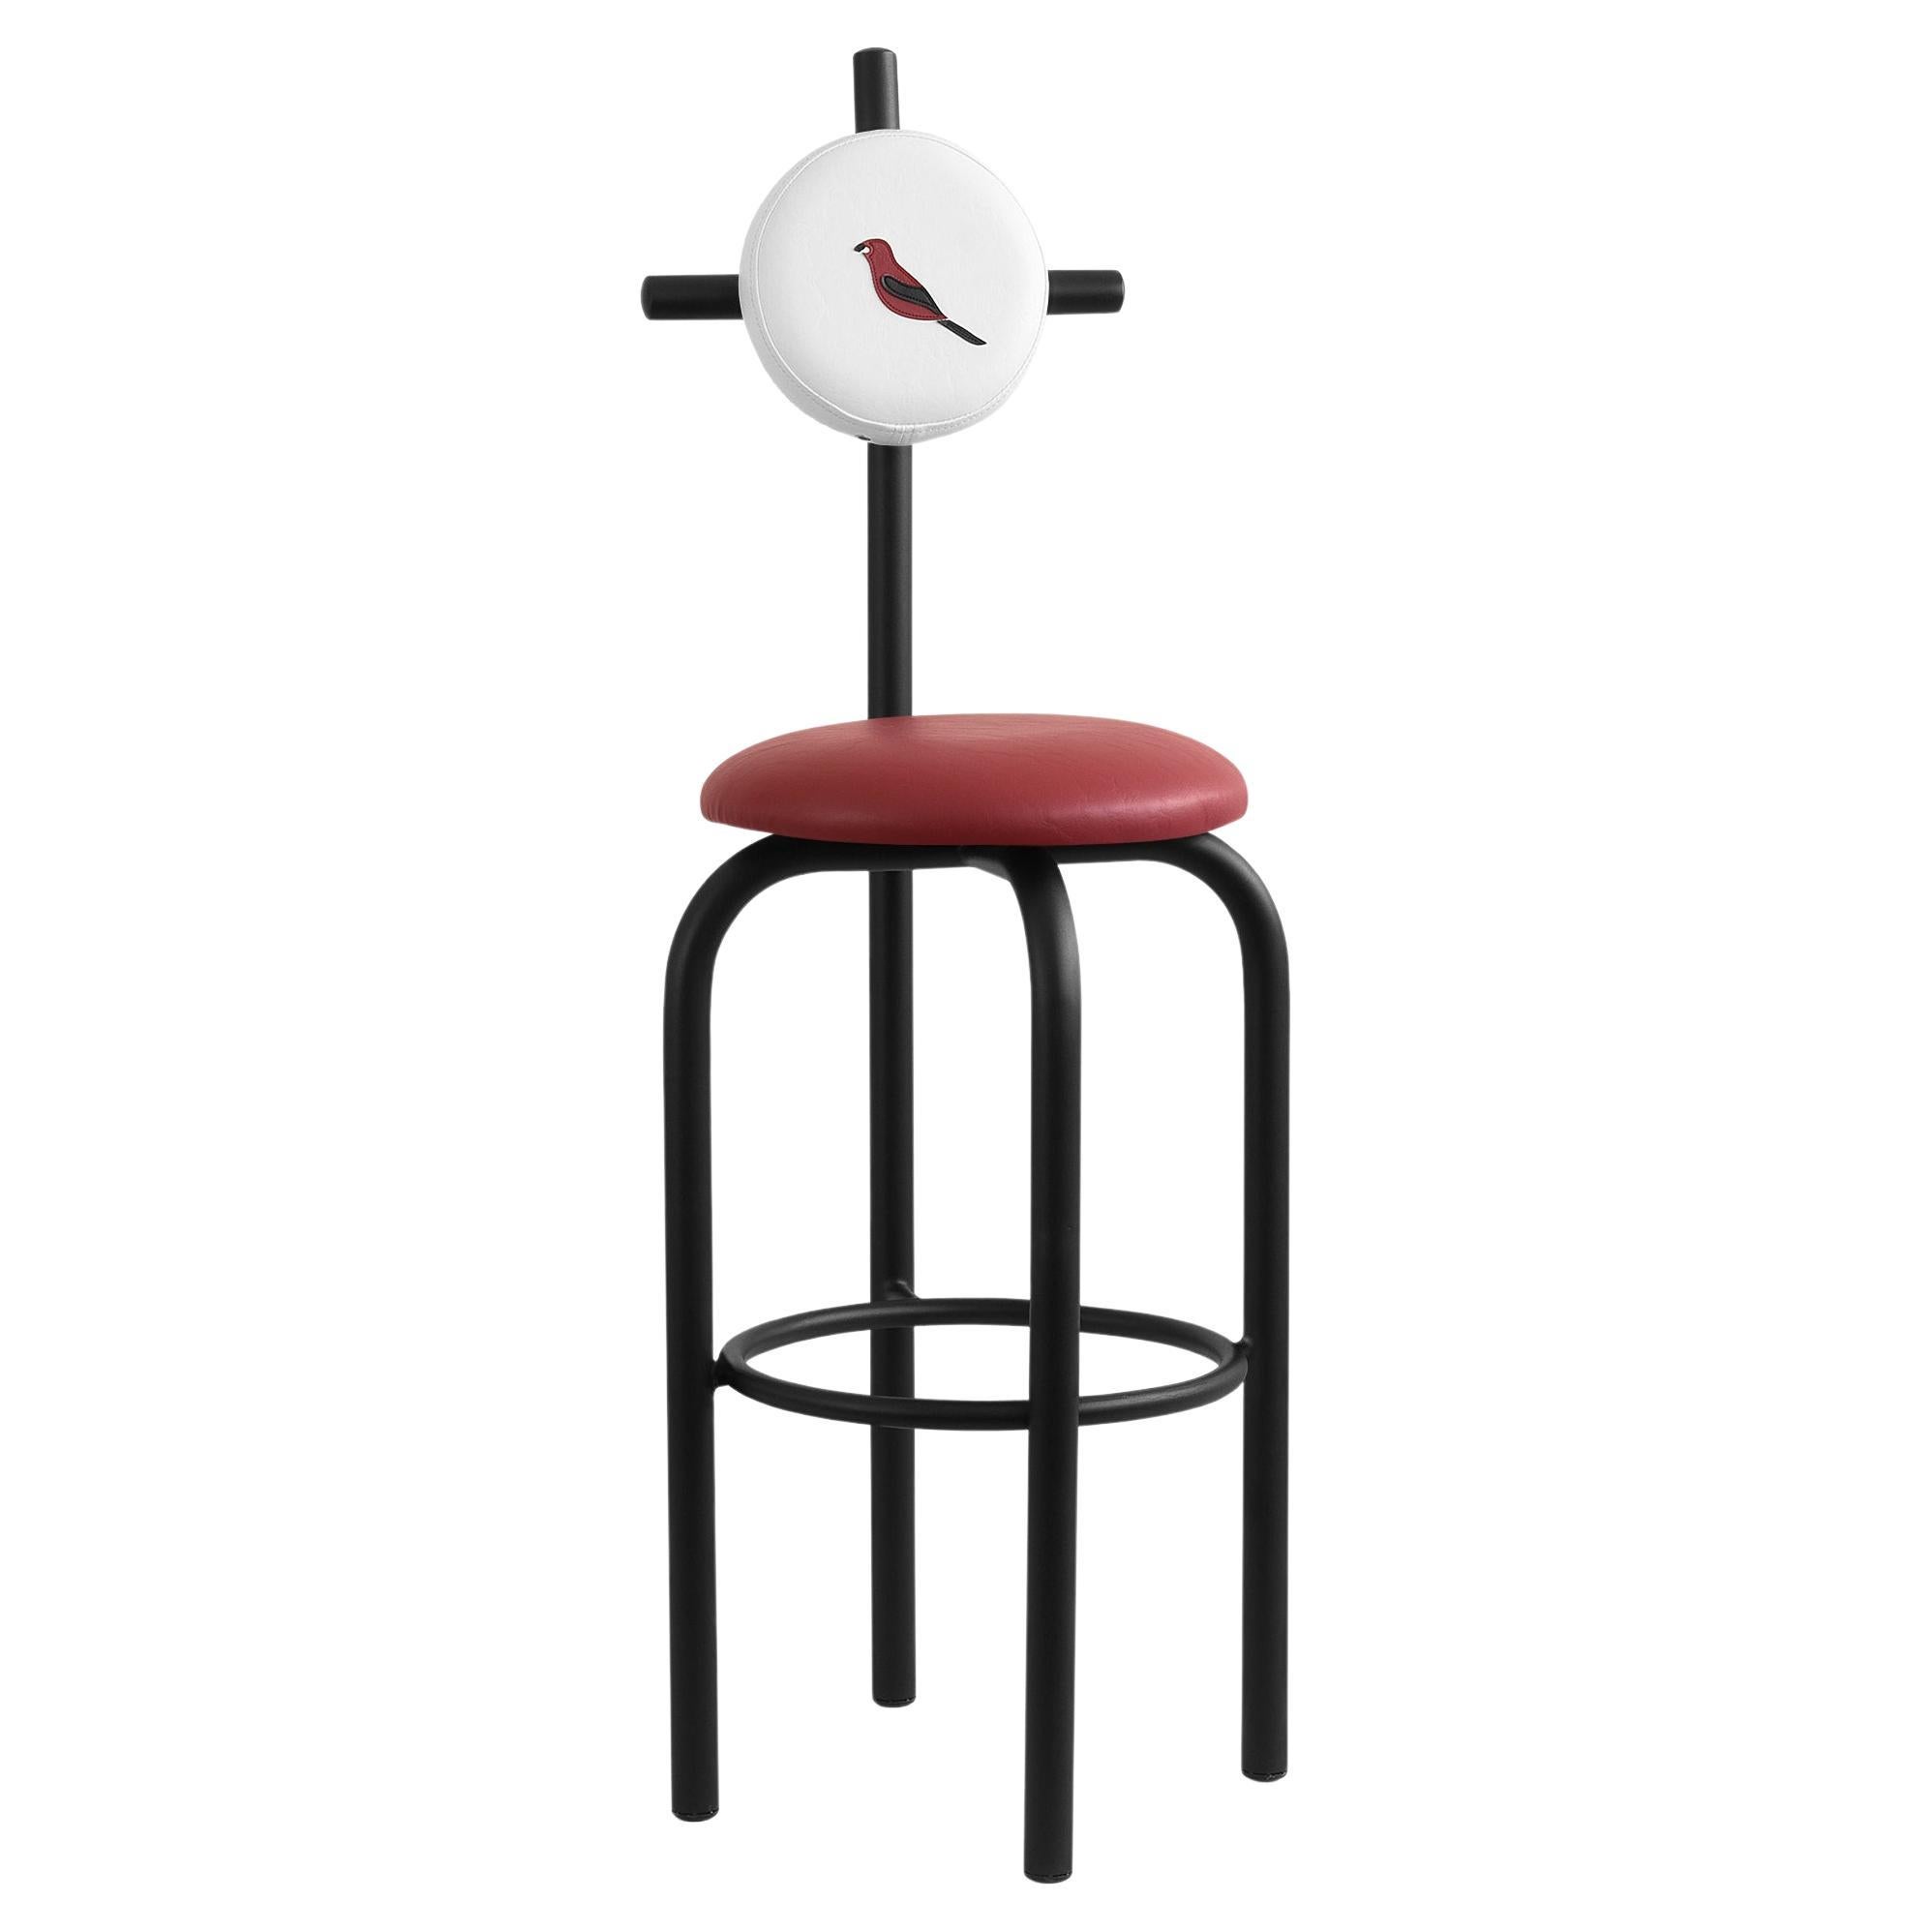 PK19 Impermeable Bar Stool, Red Seat & Black Metal Structure by Paulo Kobylka